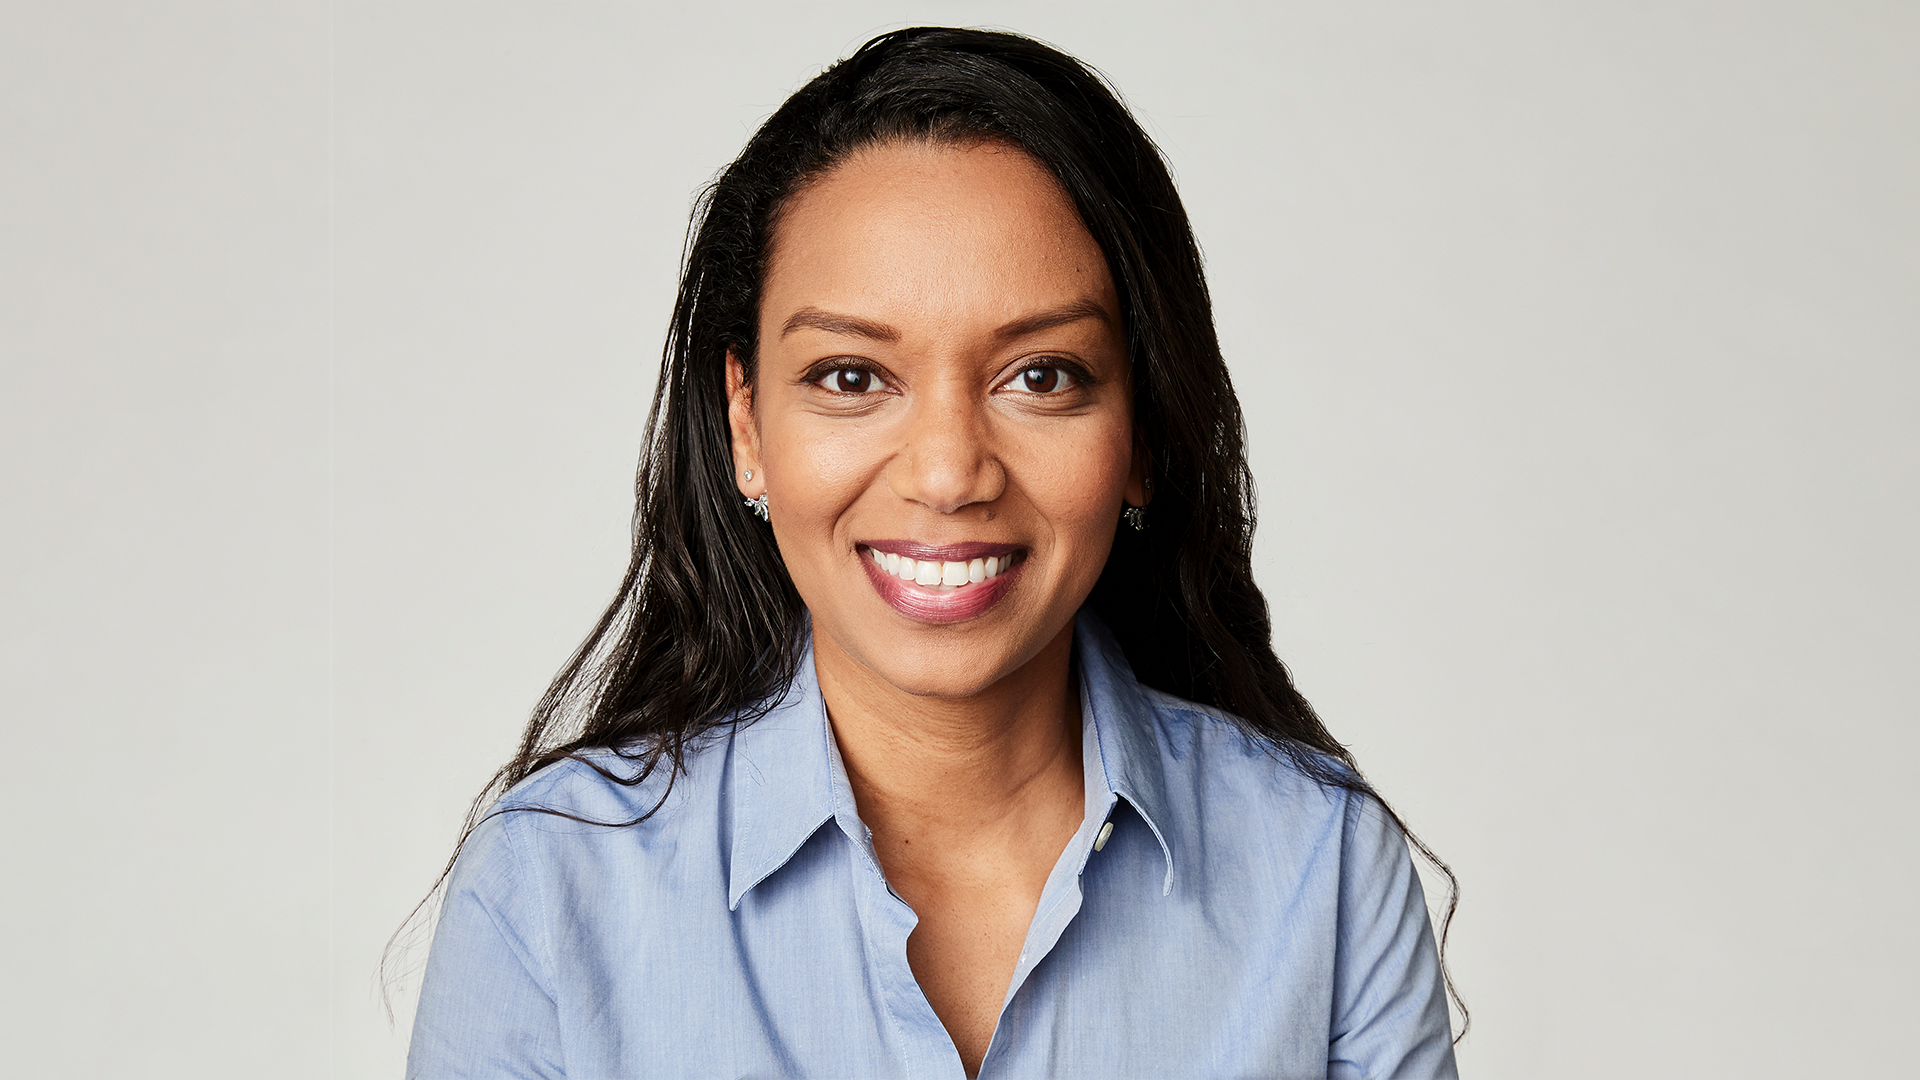 Dr. Iman Abuzeid Is Now One Of A Few Black Women Founders To Lead A Billion-Dollar Company After Incredible Health's $80M Series B